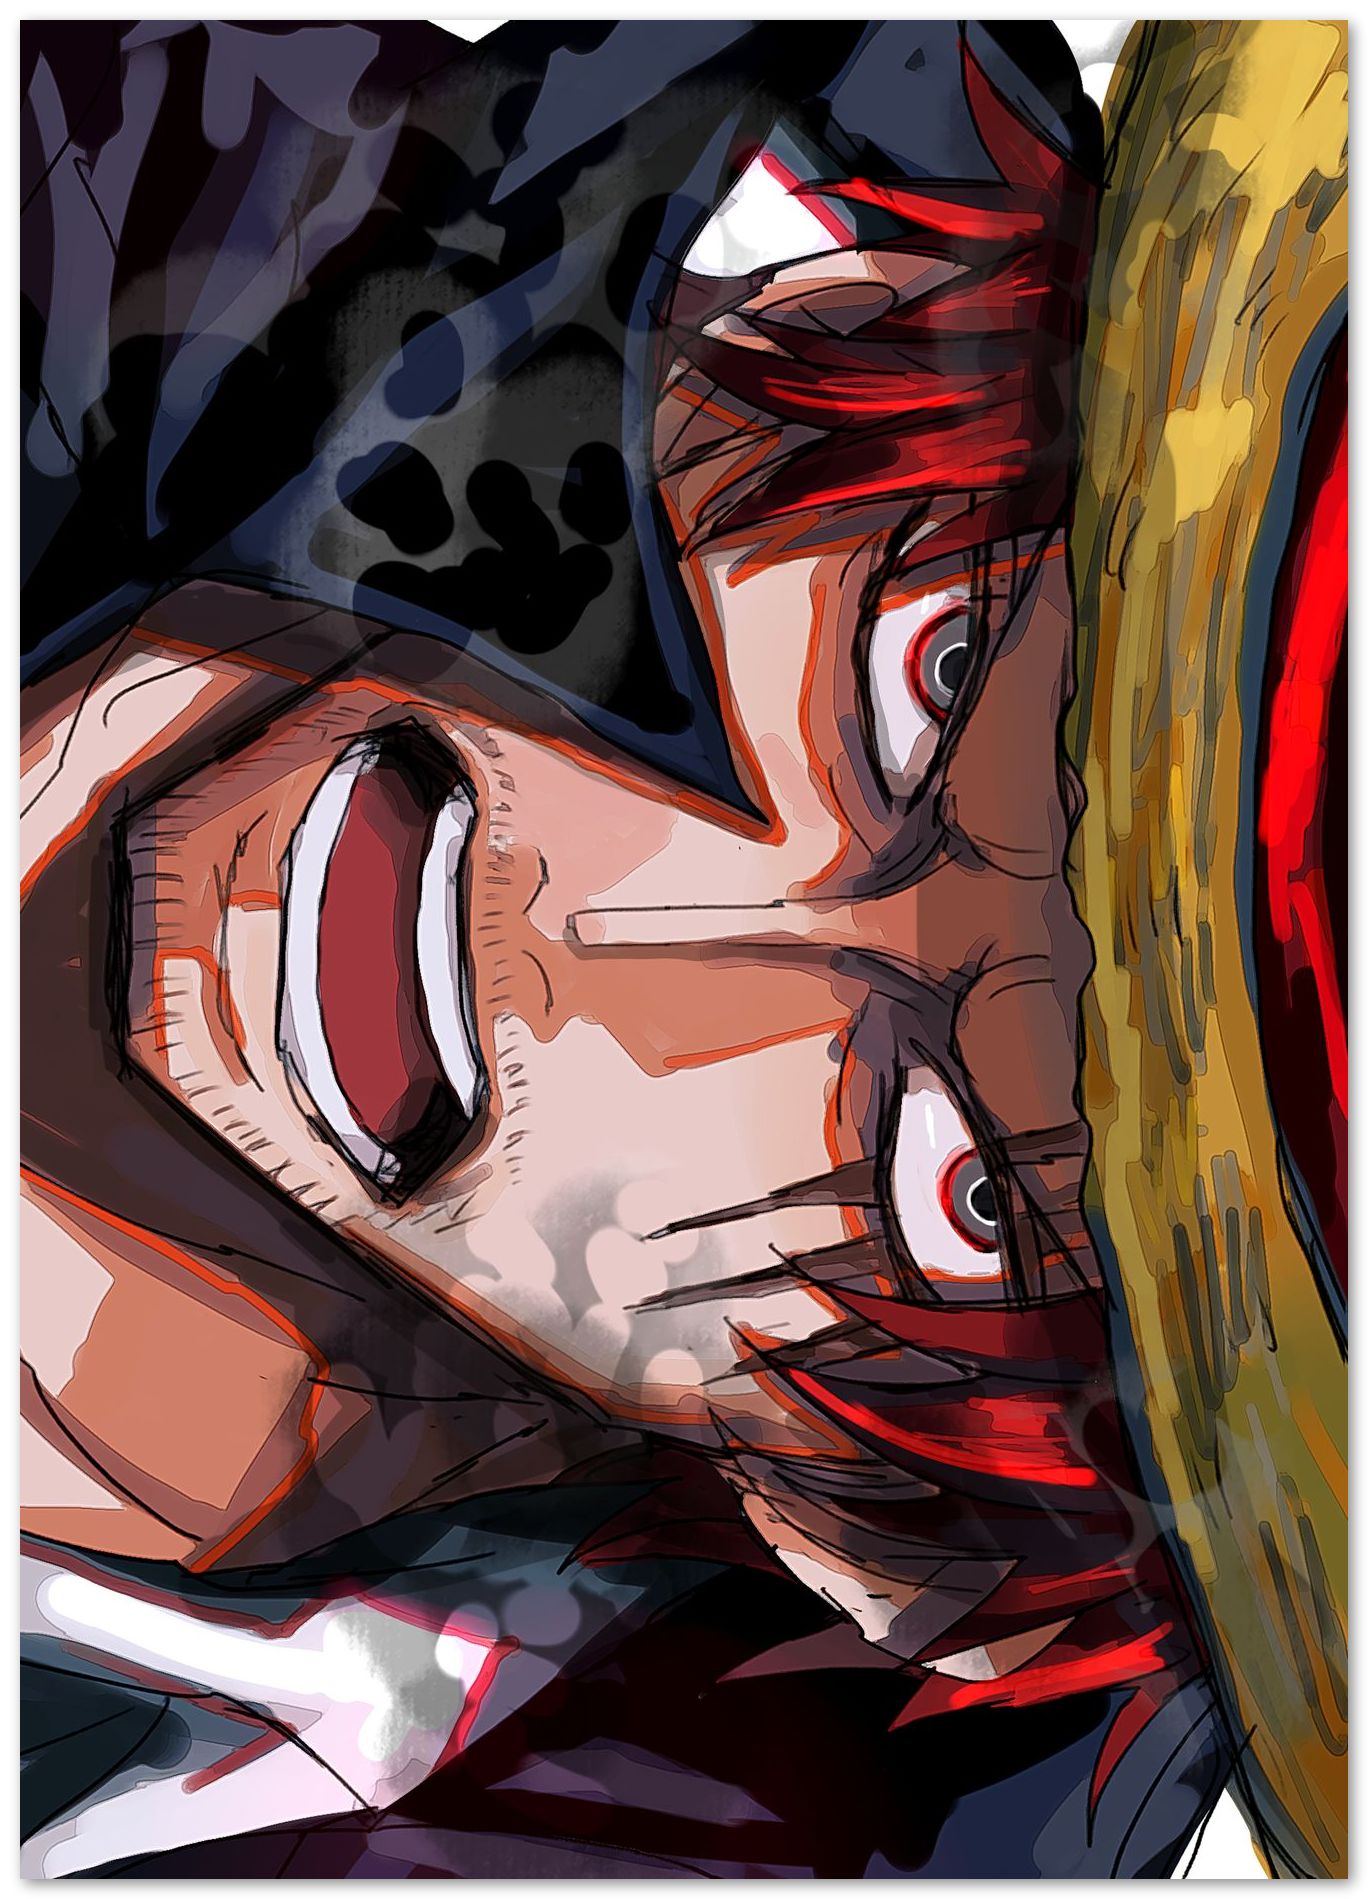 Shanks 4 - @UPGallery